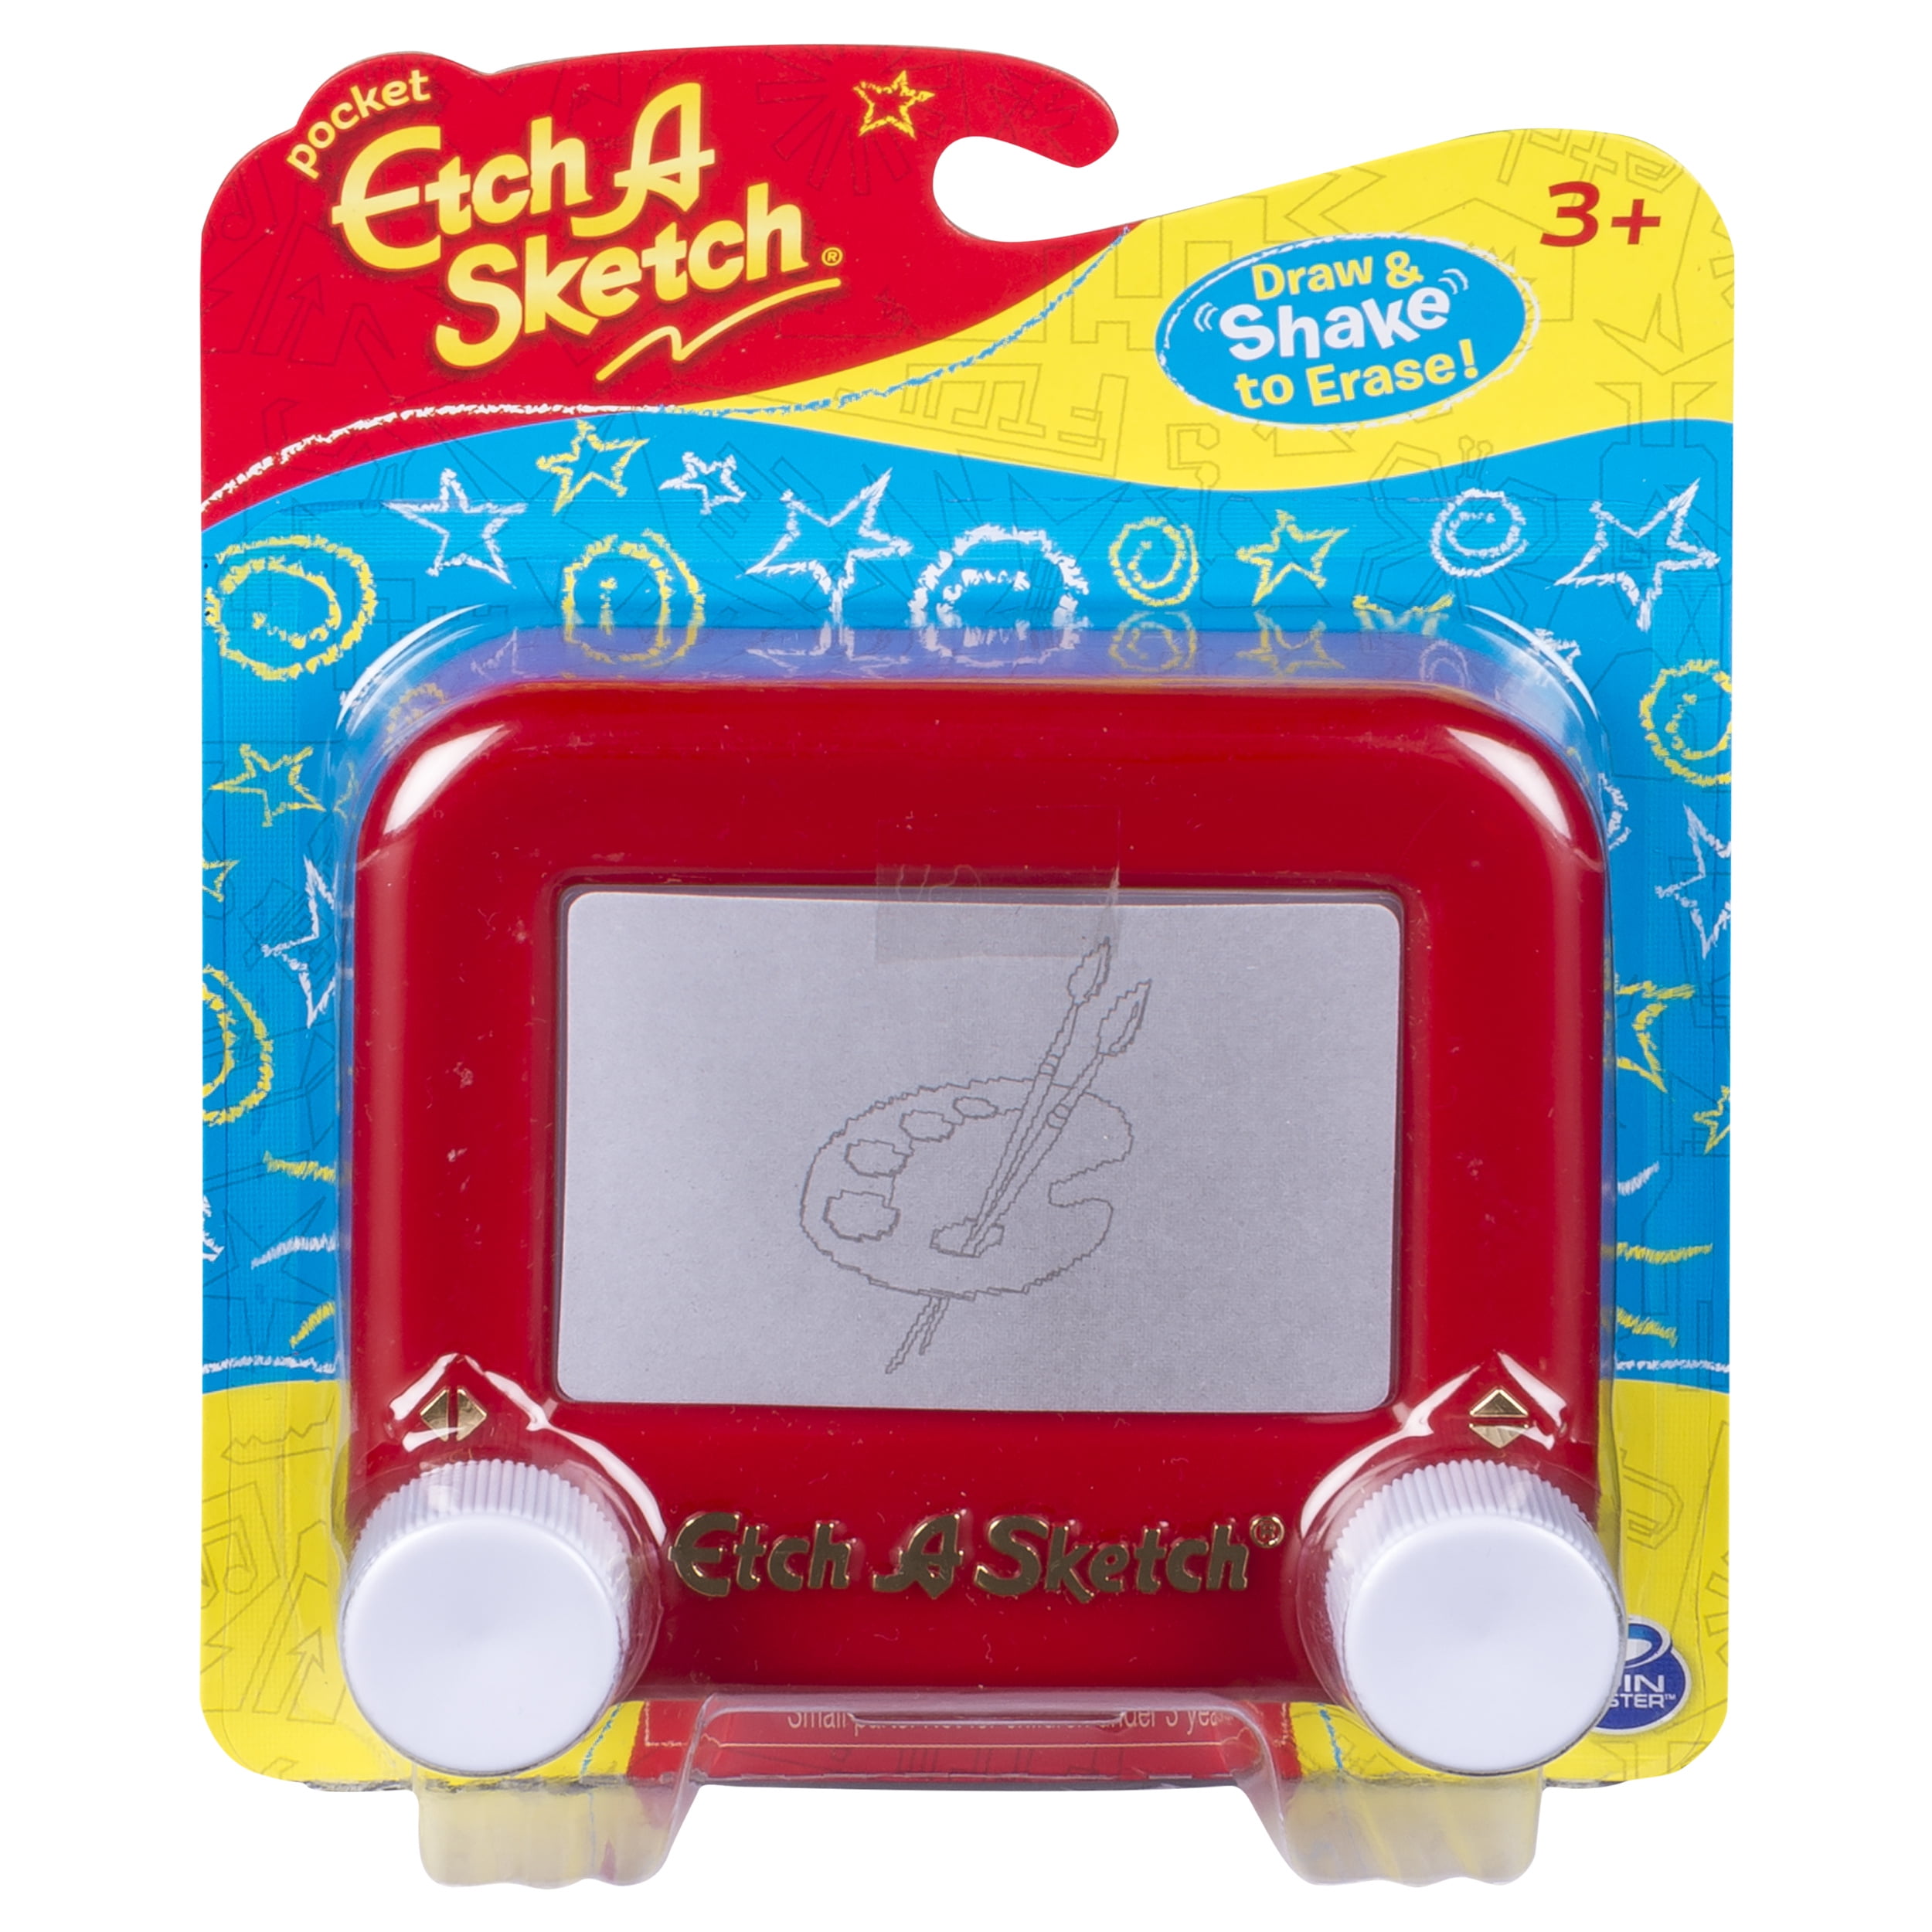 Etch A Sketch Classic Monopoly Limited-Edition Drawing Toy with Magic Screen